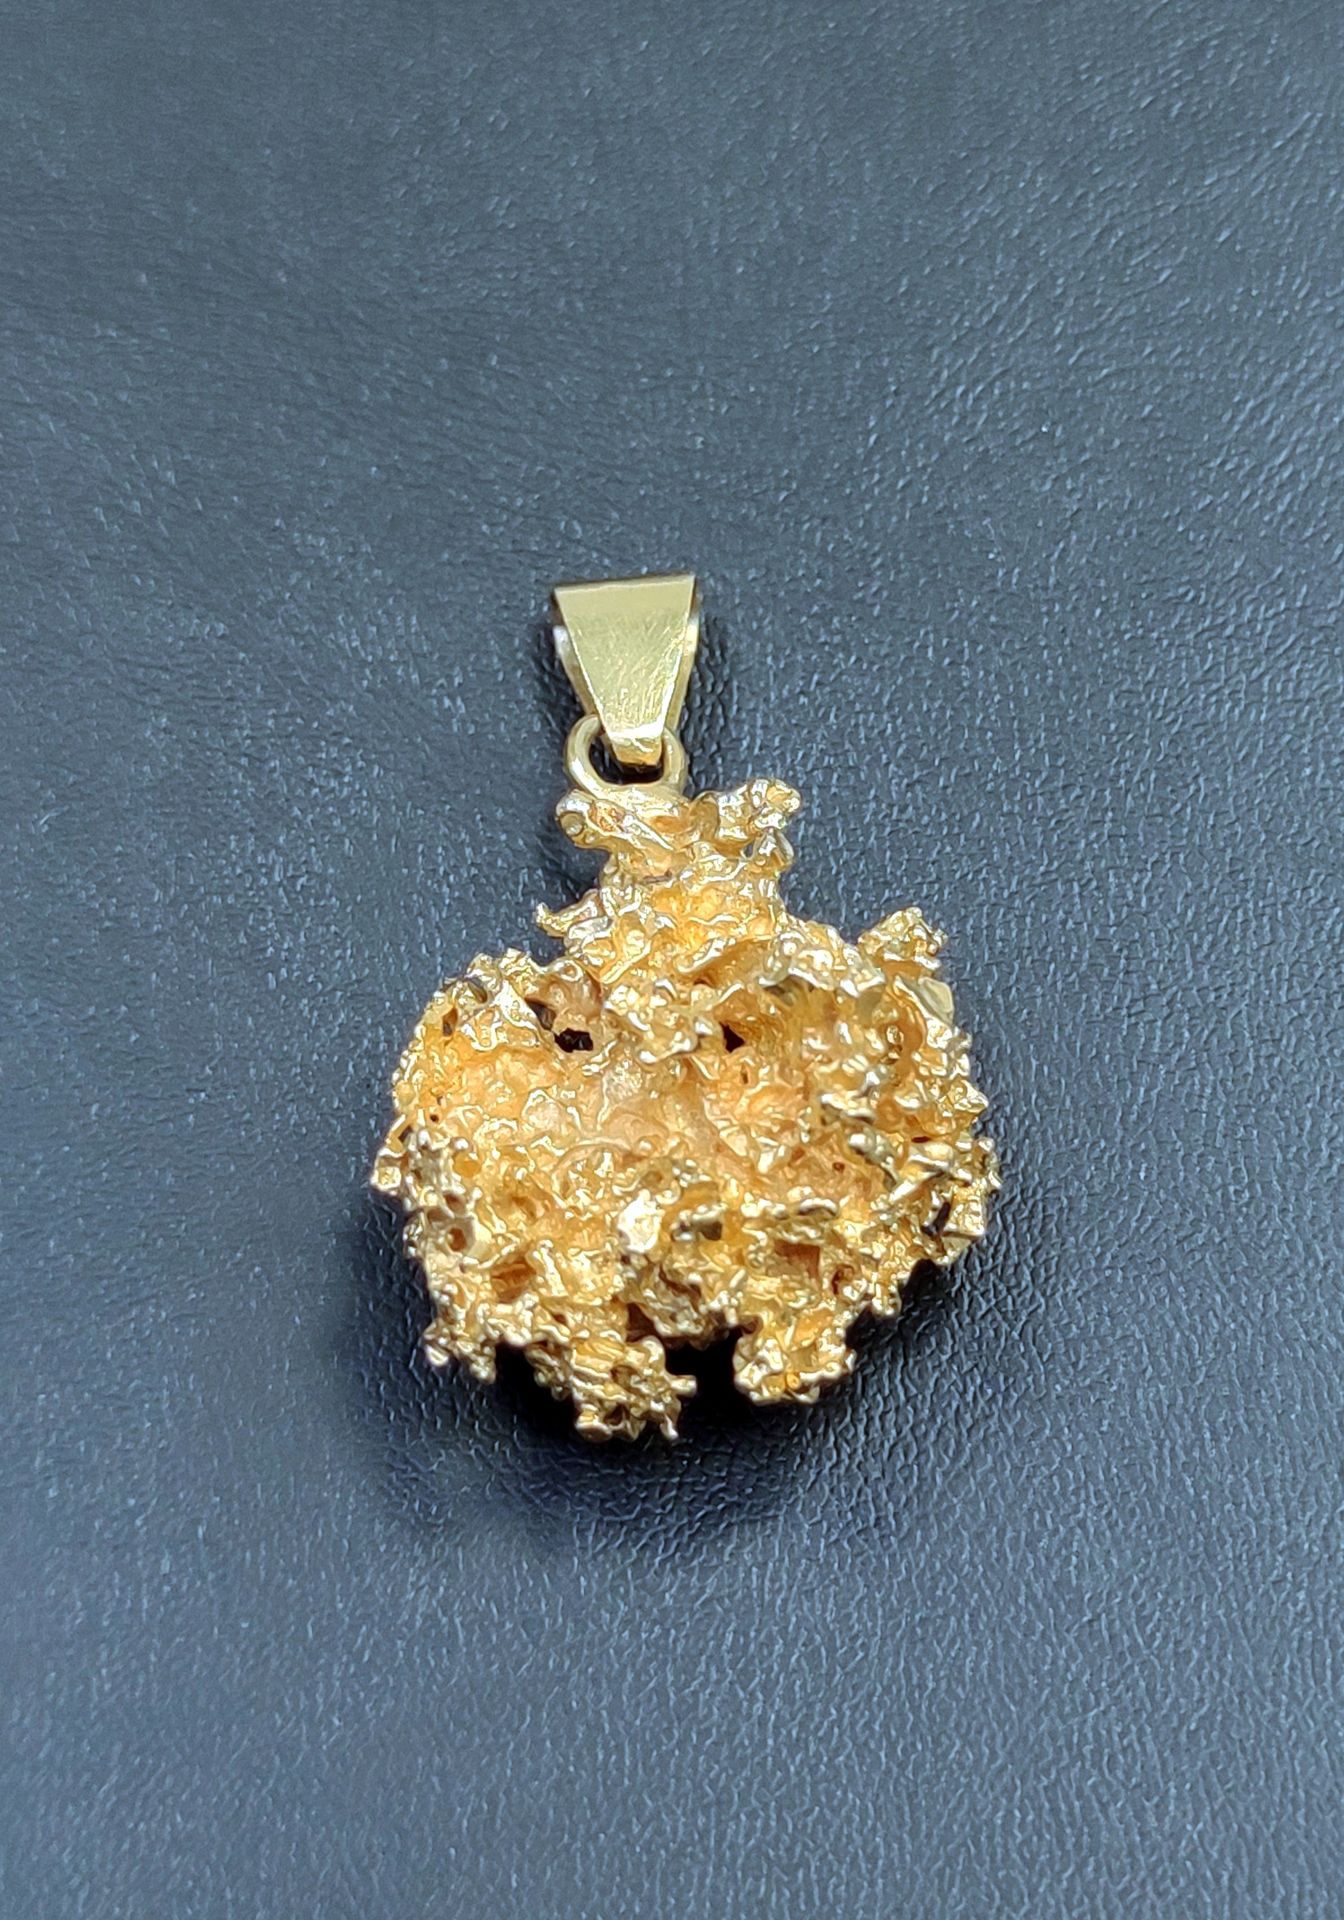 Null 
PEPITE" PENDANT in yellow gold

Weight : 30.1 g

L : 3 cm